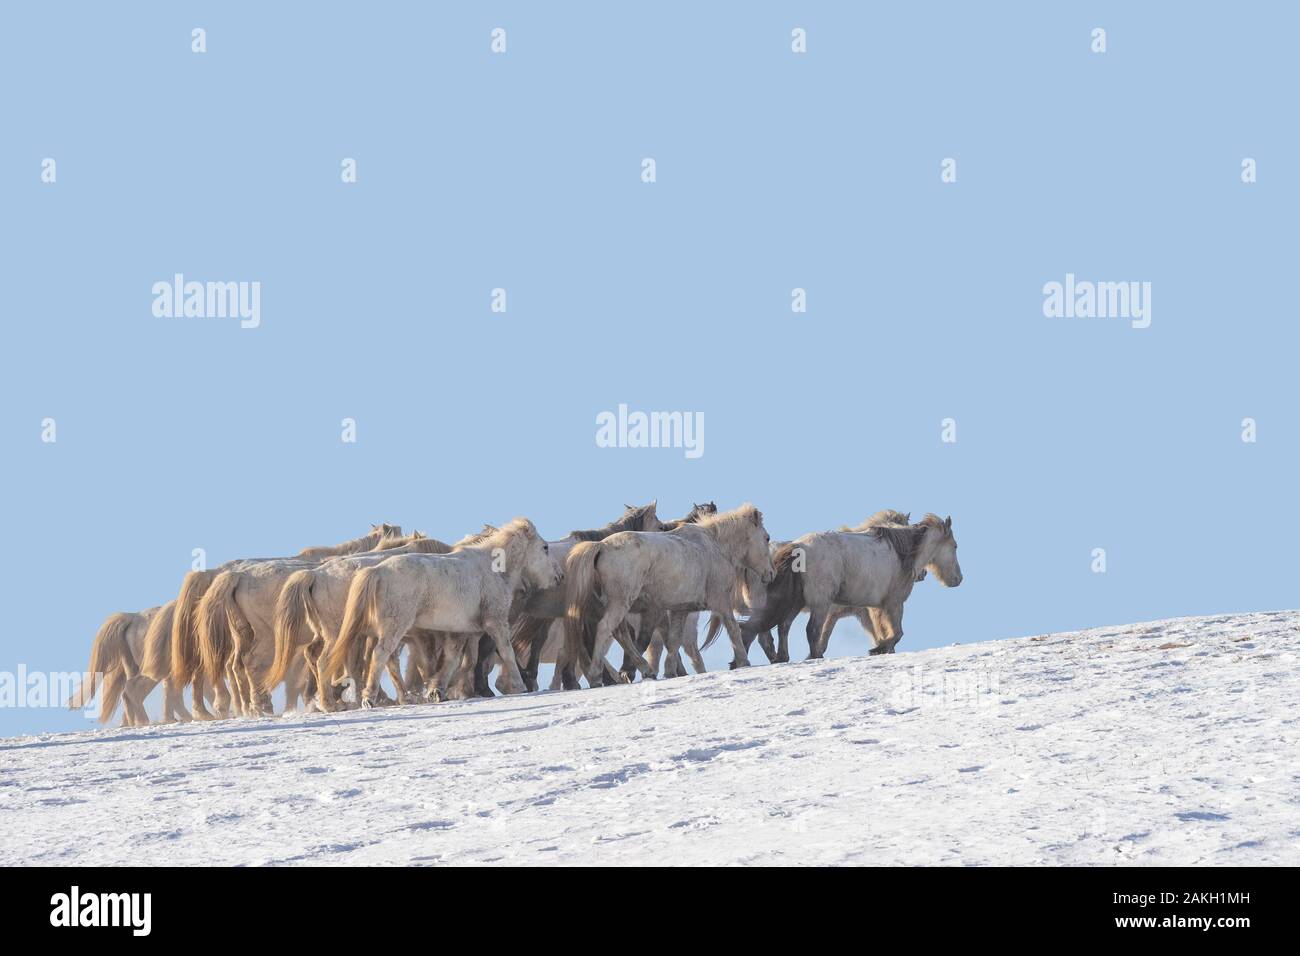 China, Inner Mongolia, Hebei Province, Zhangjiakou, Bashang Grassland, horses in a meadow covered by snow Stock Photo